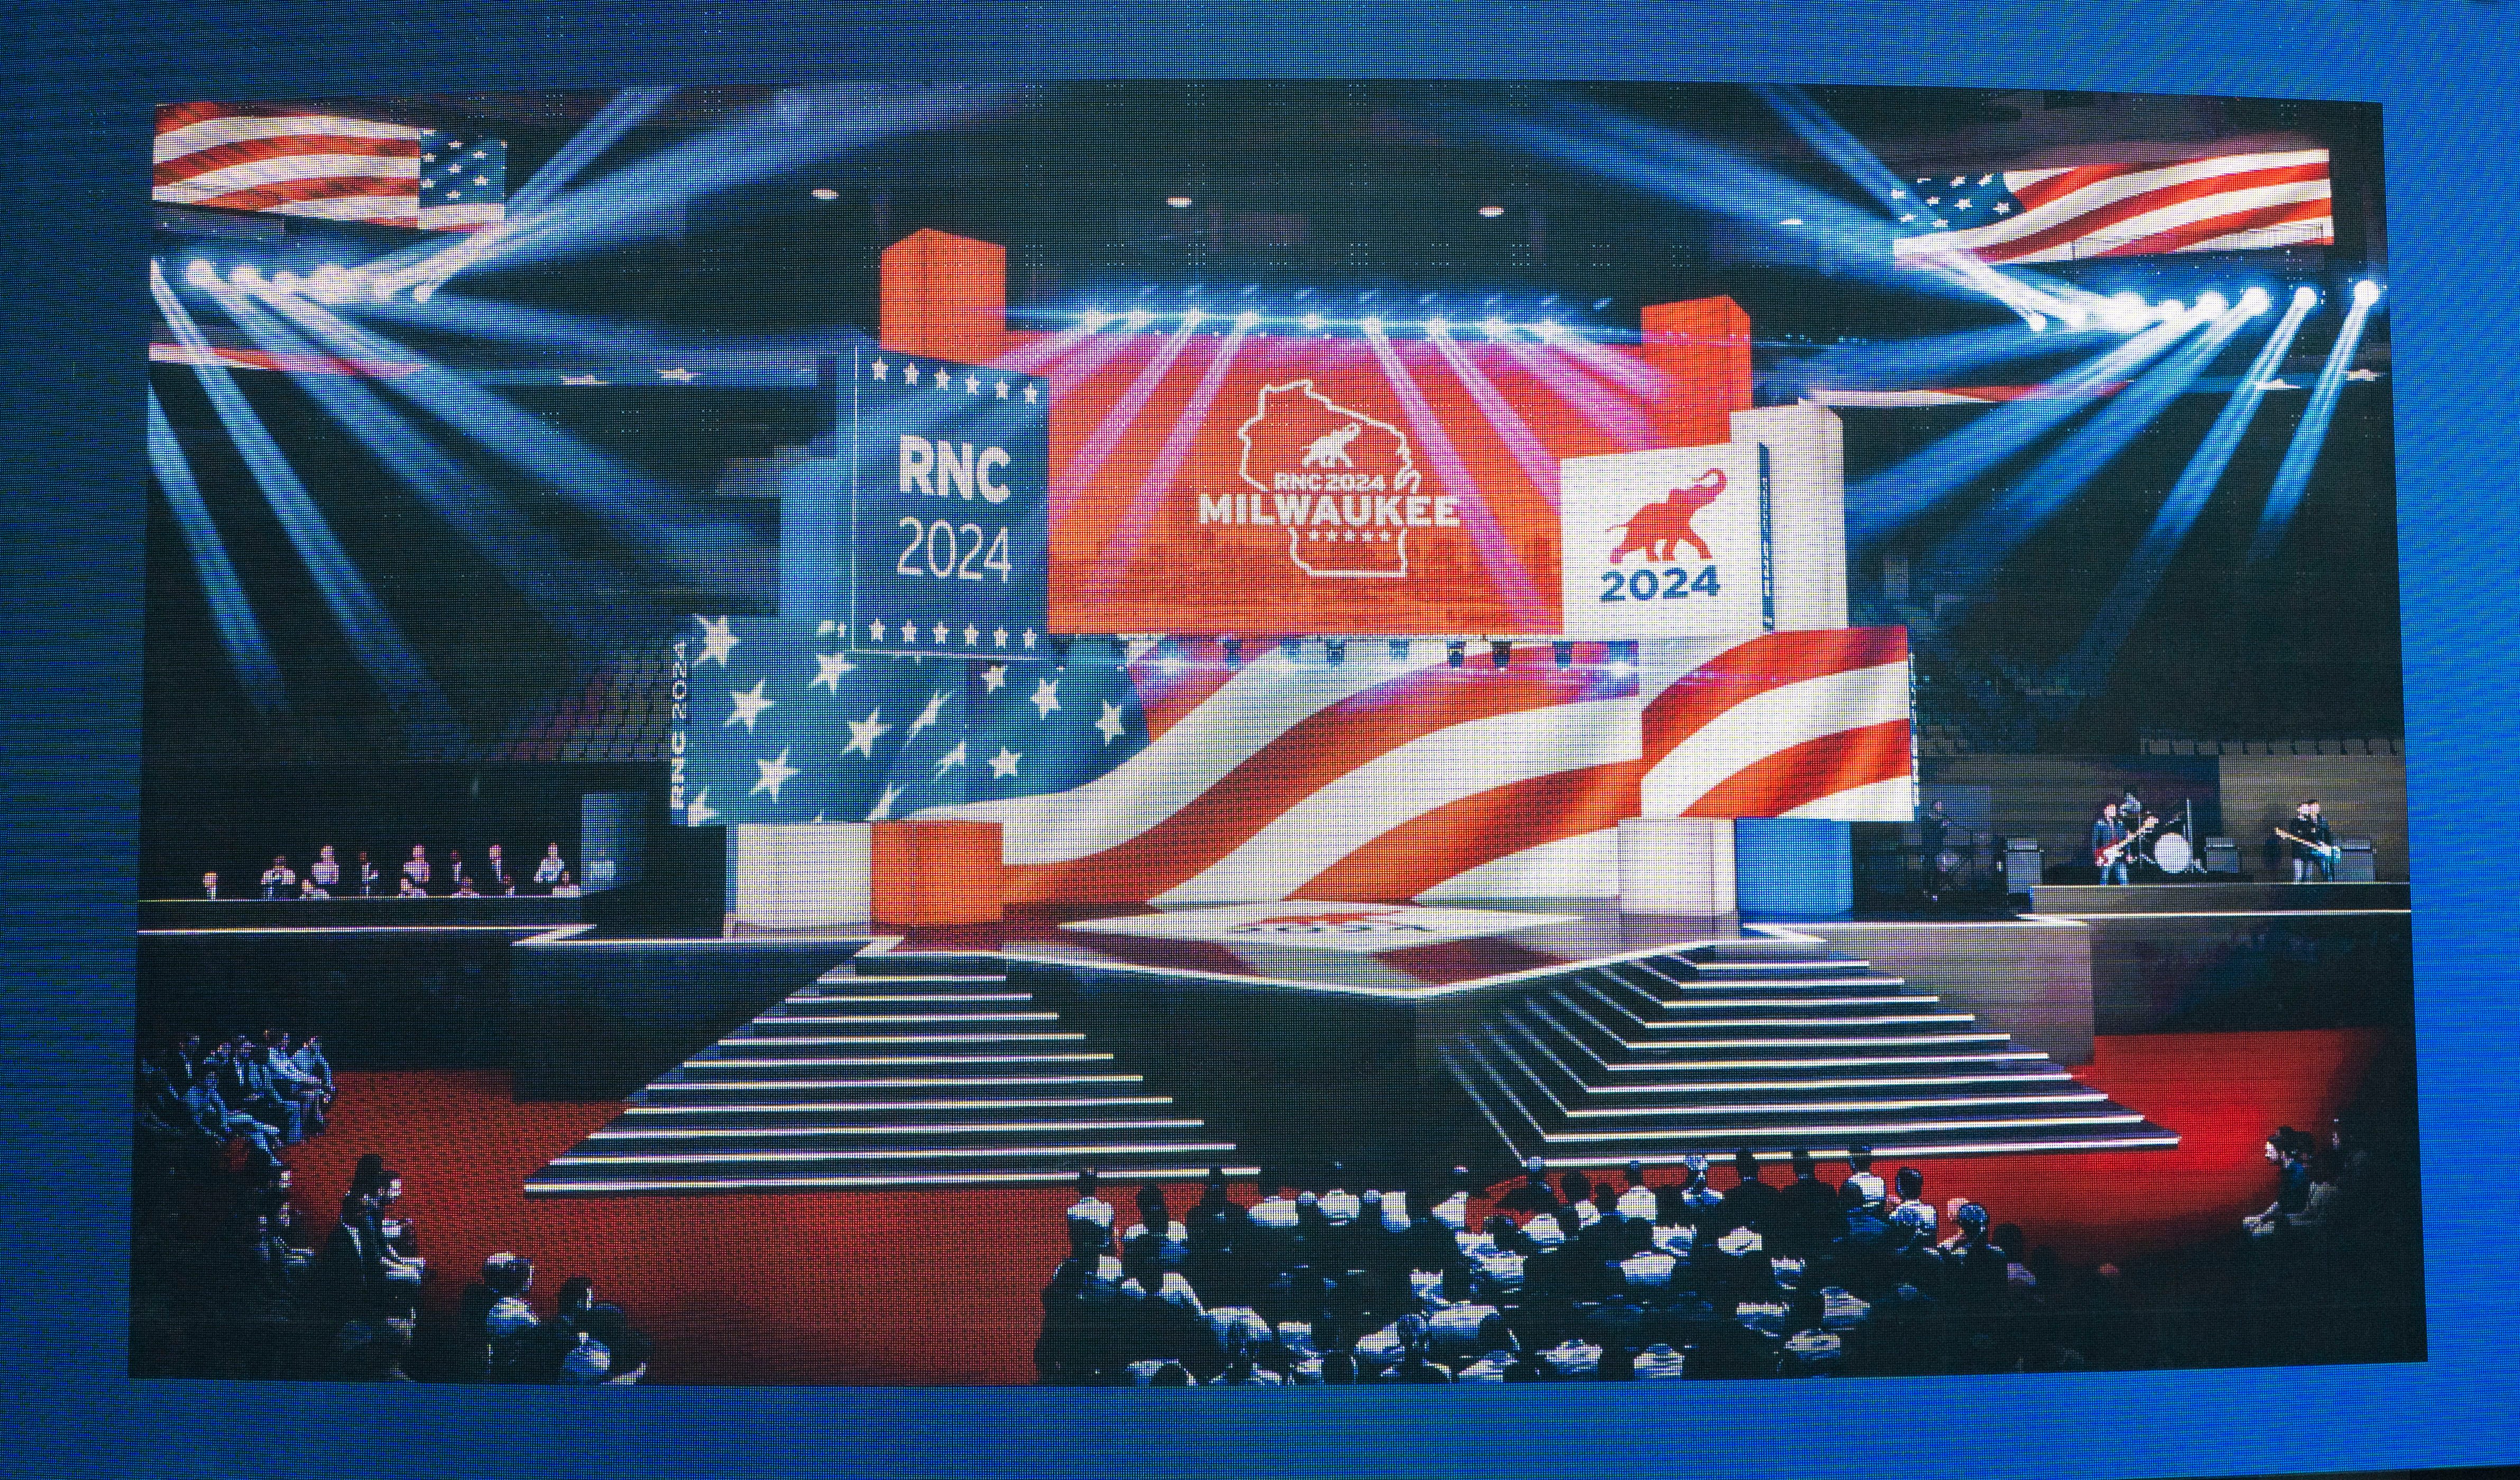 Republican National Convention stage design at Milwaukee's Fiserv Forum unveiled